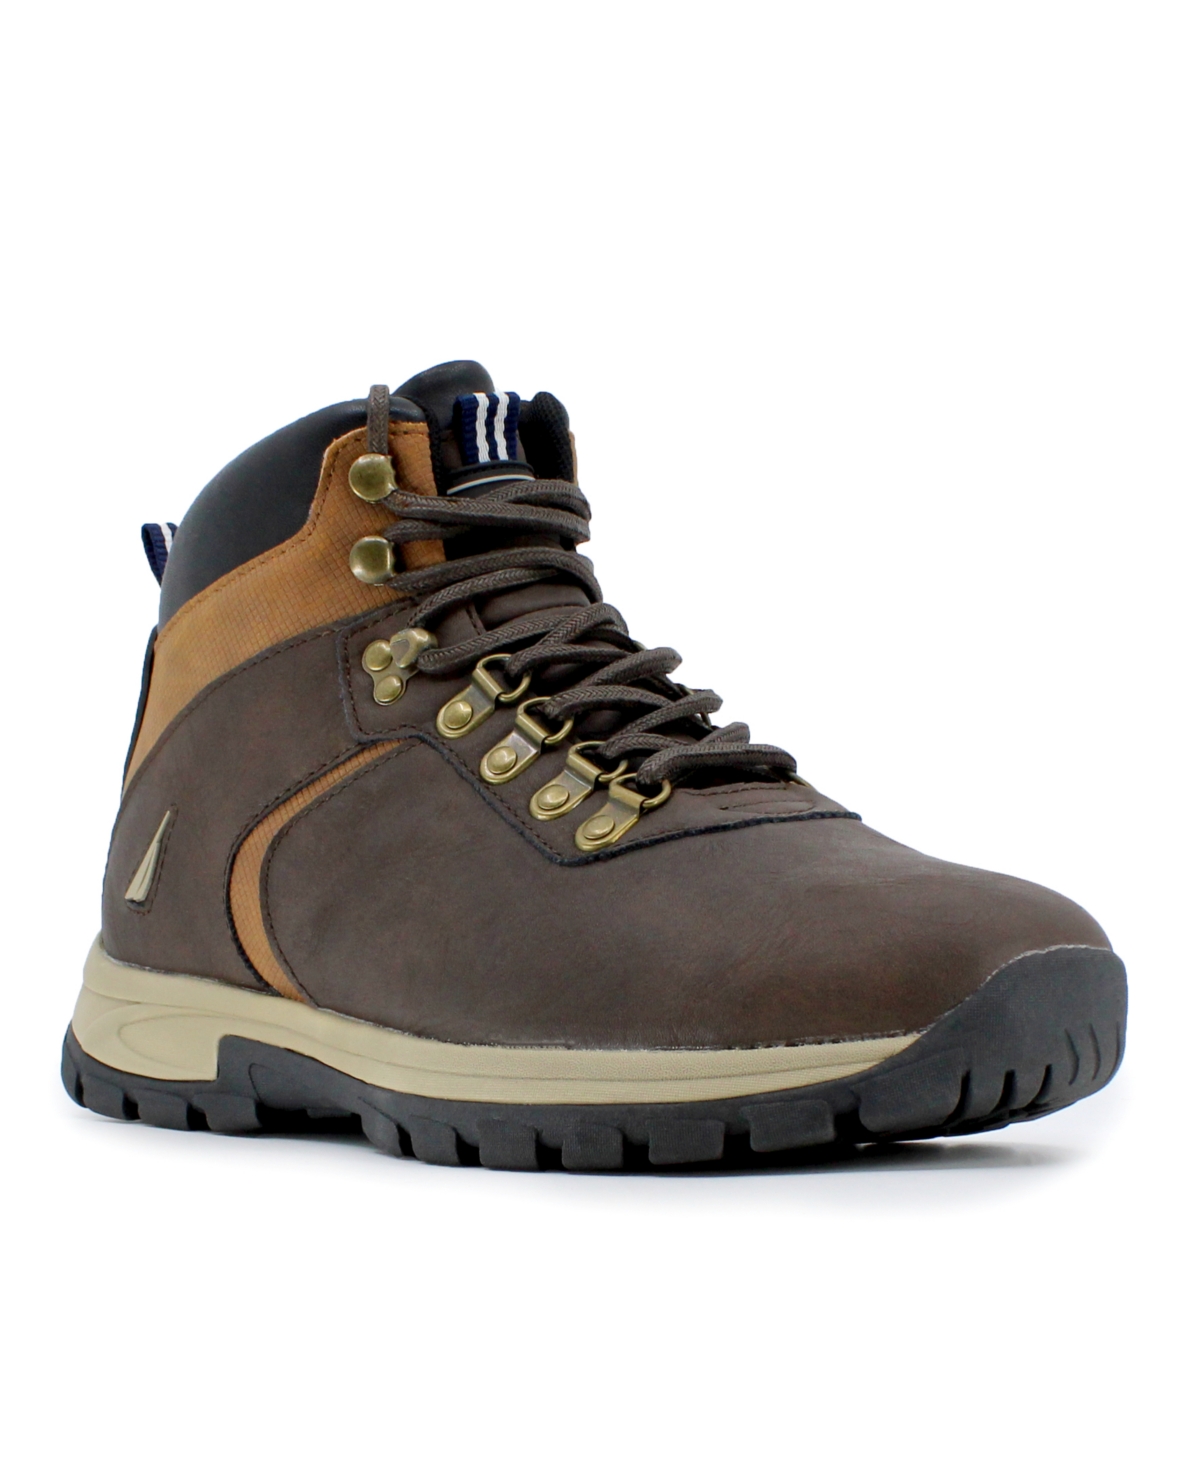 Men's Ortler Mid Hiking Boots - Tan